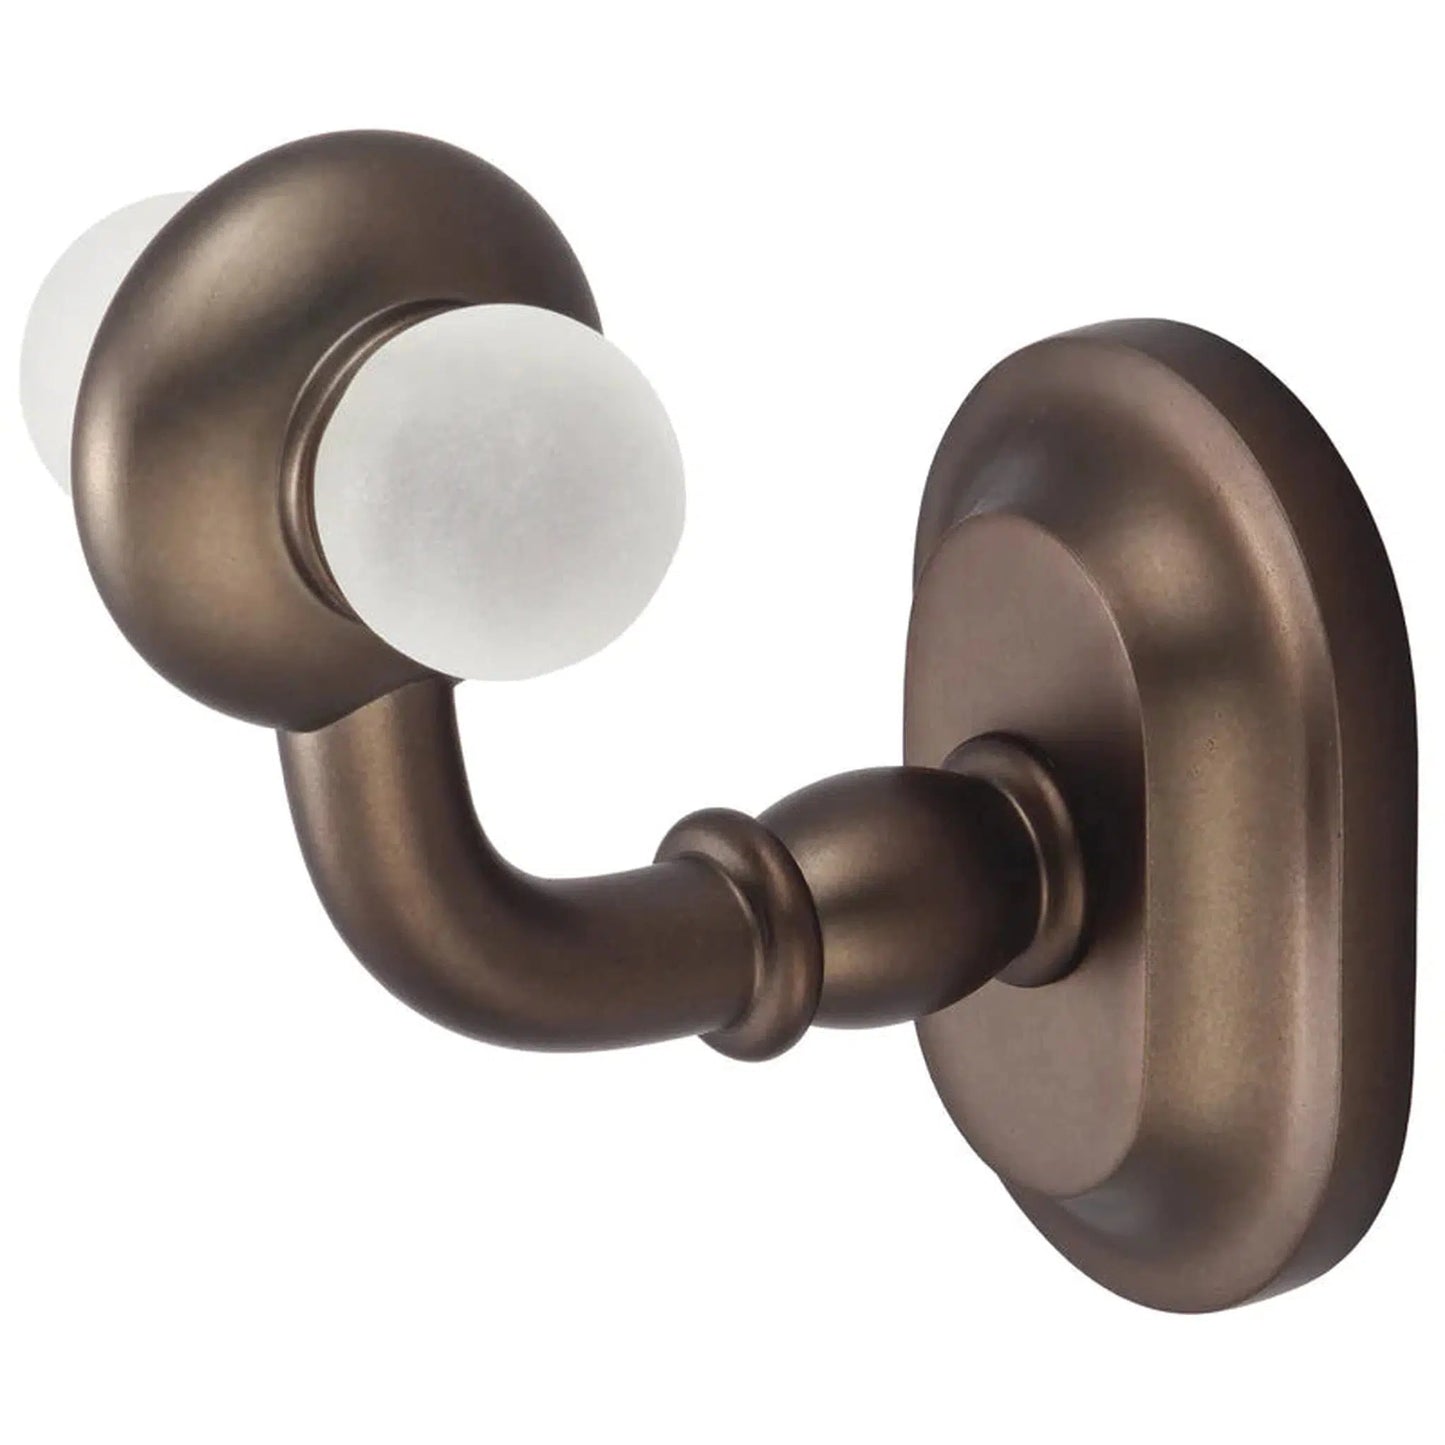 Water Creation Elegant Matching Glass Series Robe Hooks in Oil-rubbed Bronze Finish